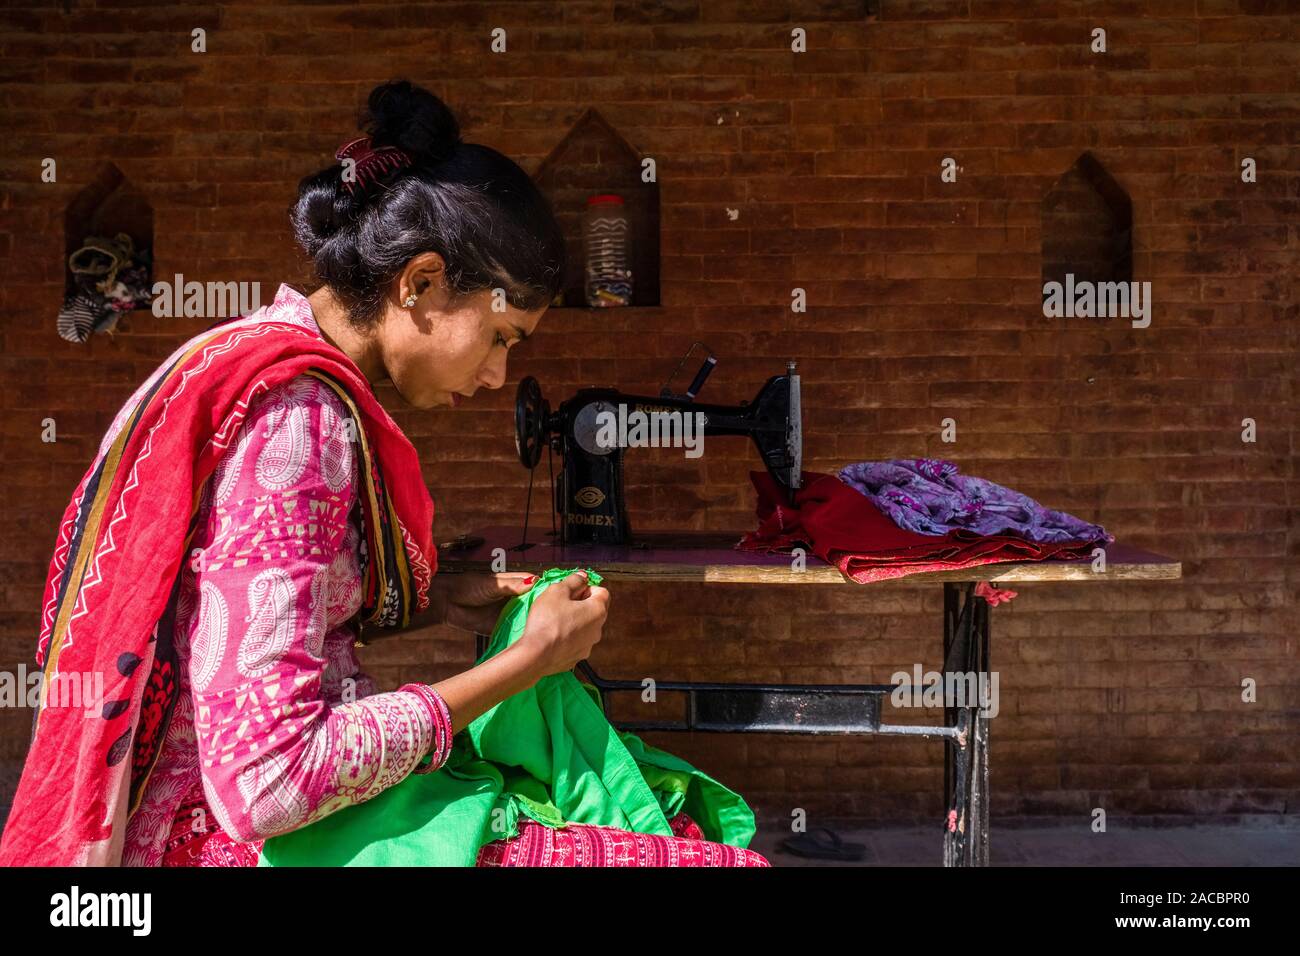 Tailor woman is working with green fabric Stock Photo